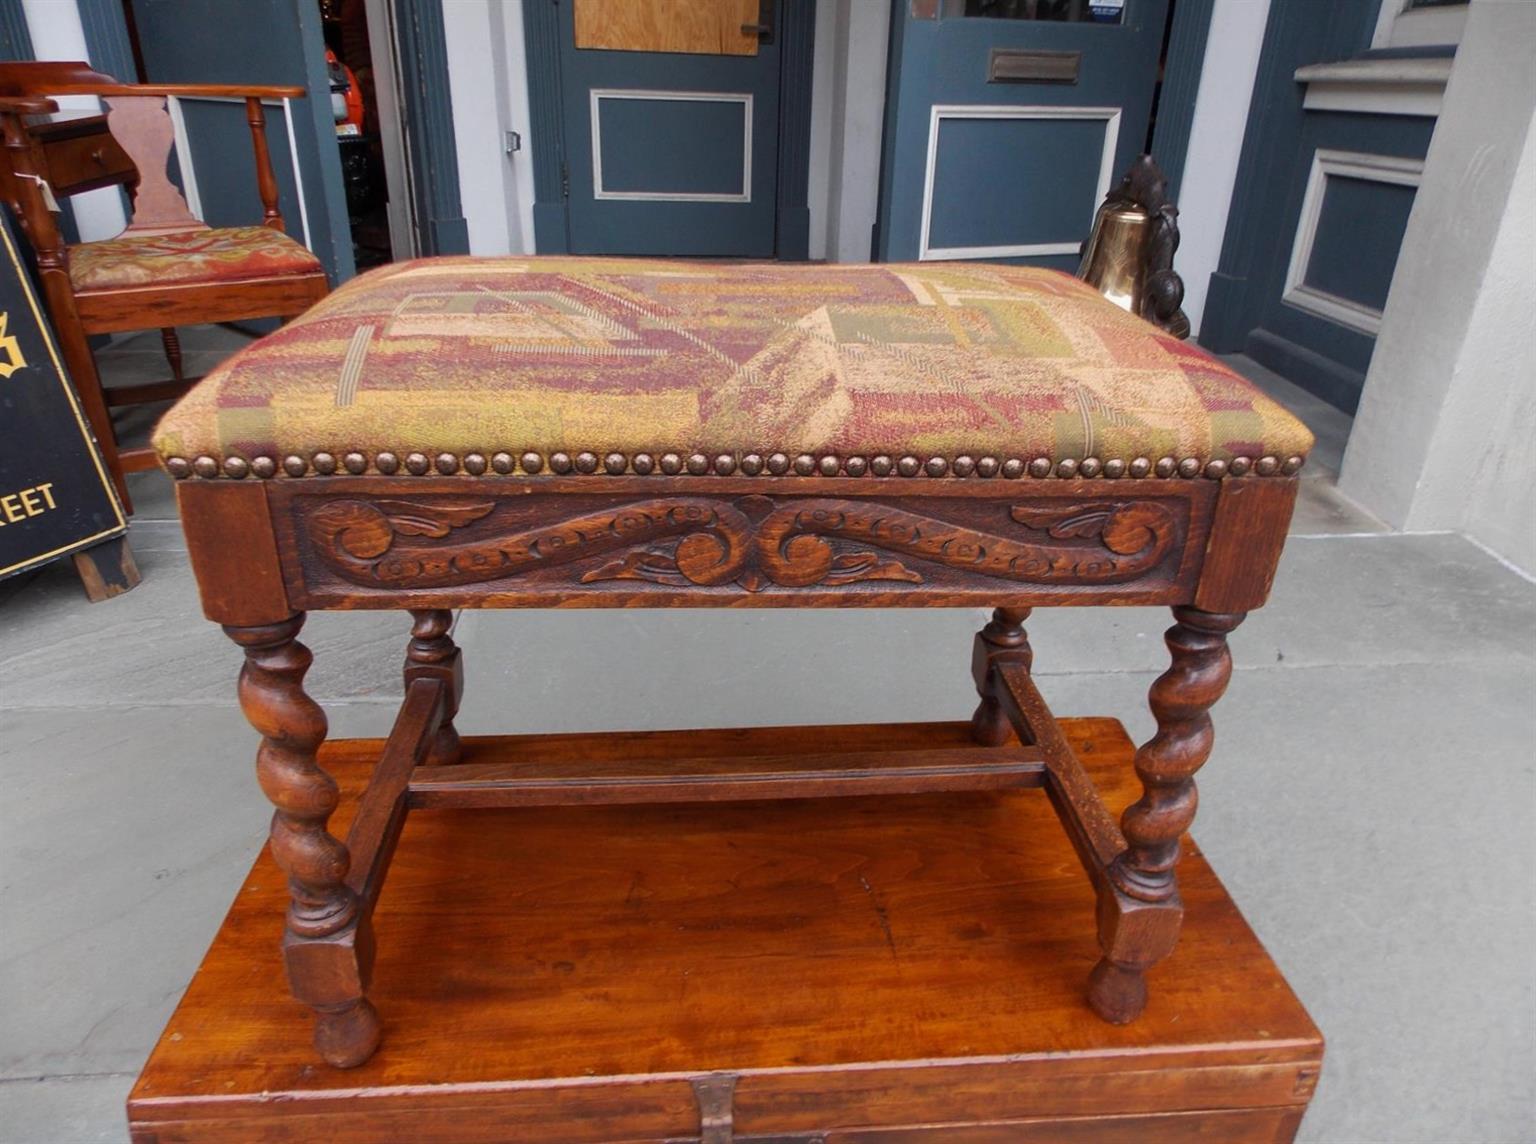 Hand-Carved French Walnut Decorative Carved Upholstered Stool with Barley Twist Legs, C 1850 For Sale